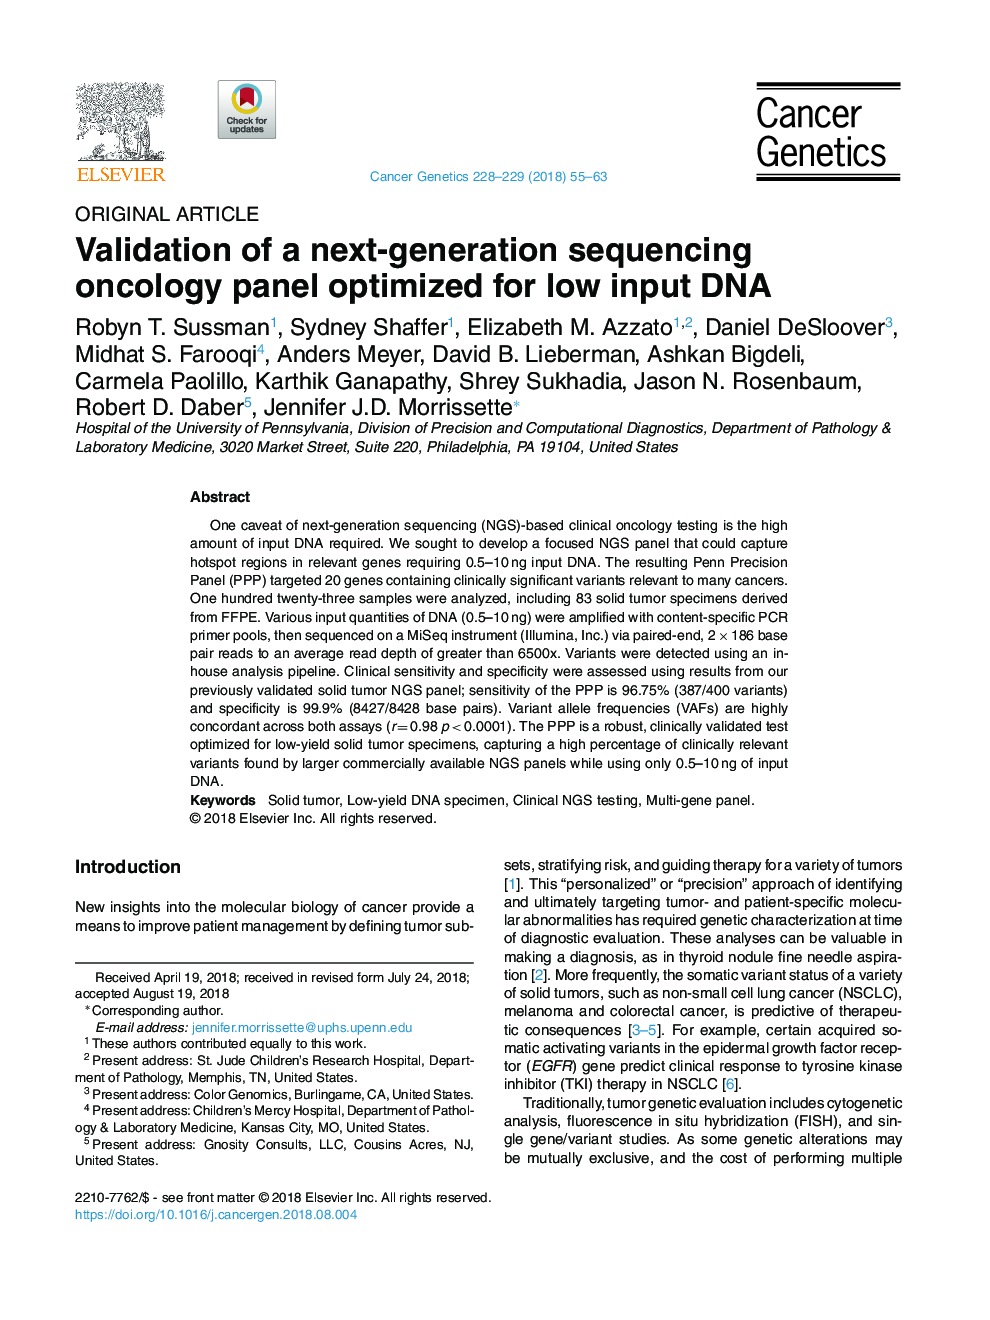 Validation of a next-generation sequencing oncology panel optimized for low input DNA